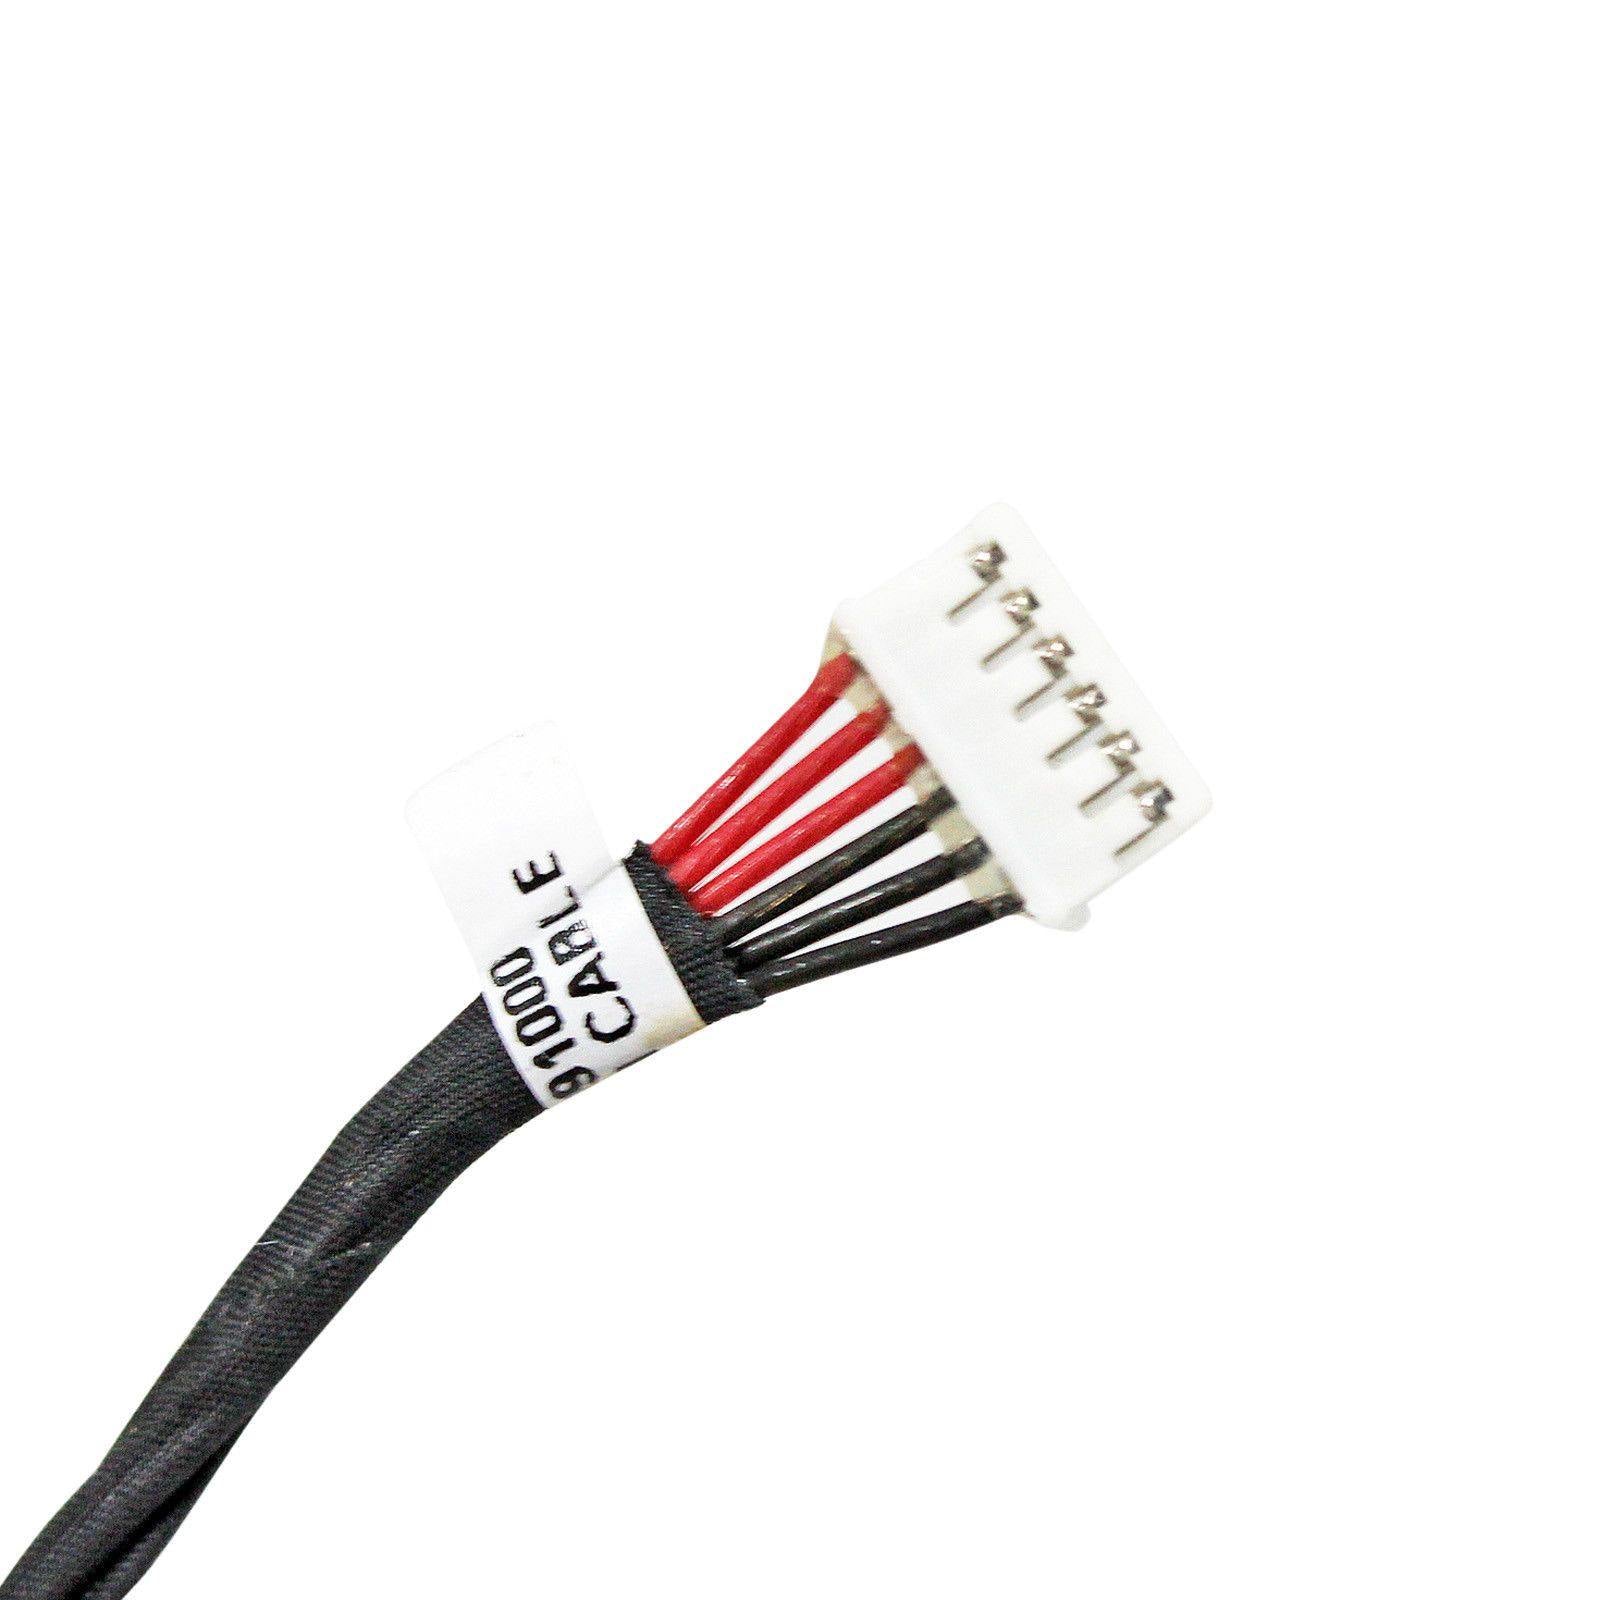 New Asus K750JA K750JB K750JN K750LA K750LB K750LN 6 Pin DC Jack Cable